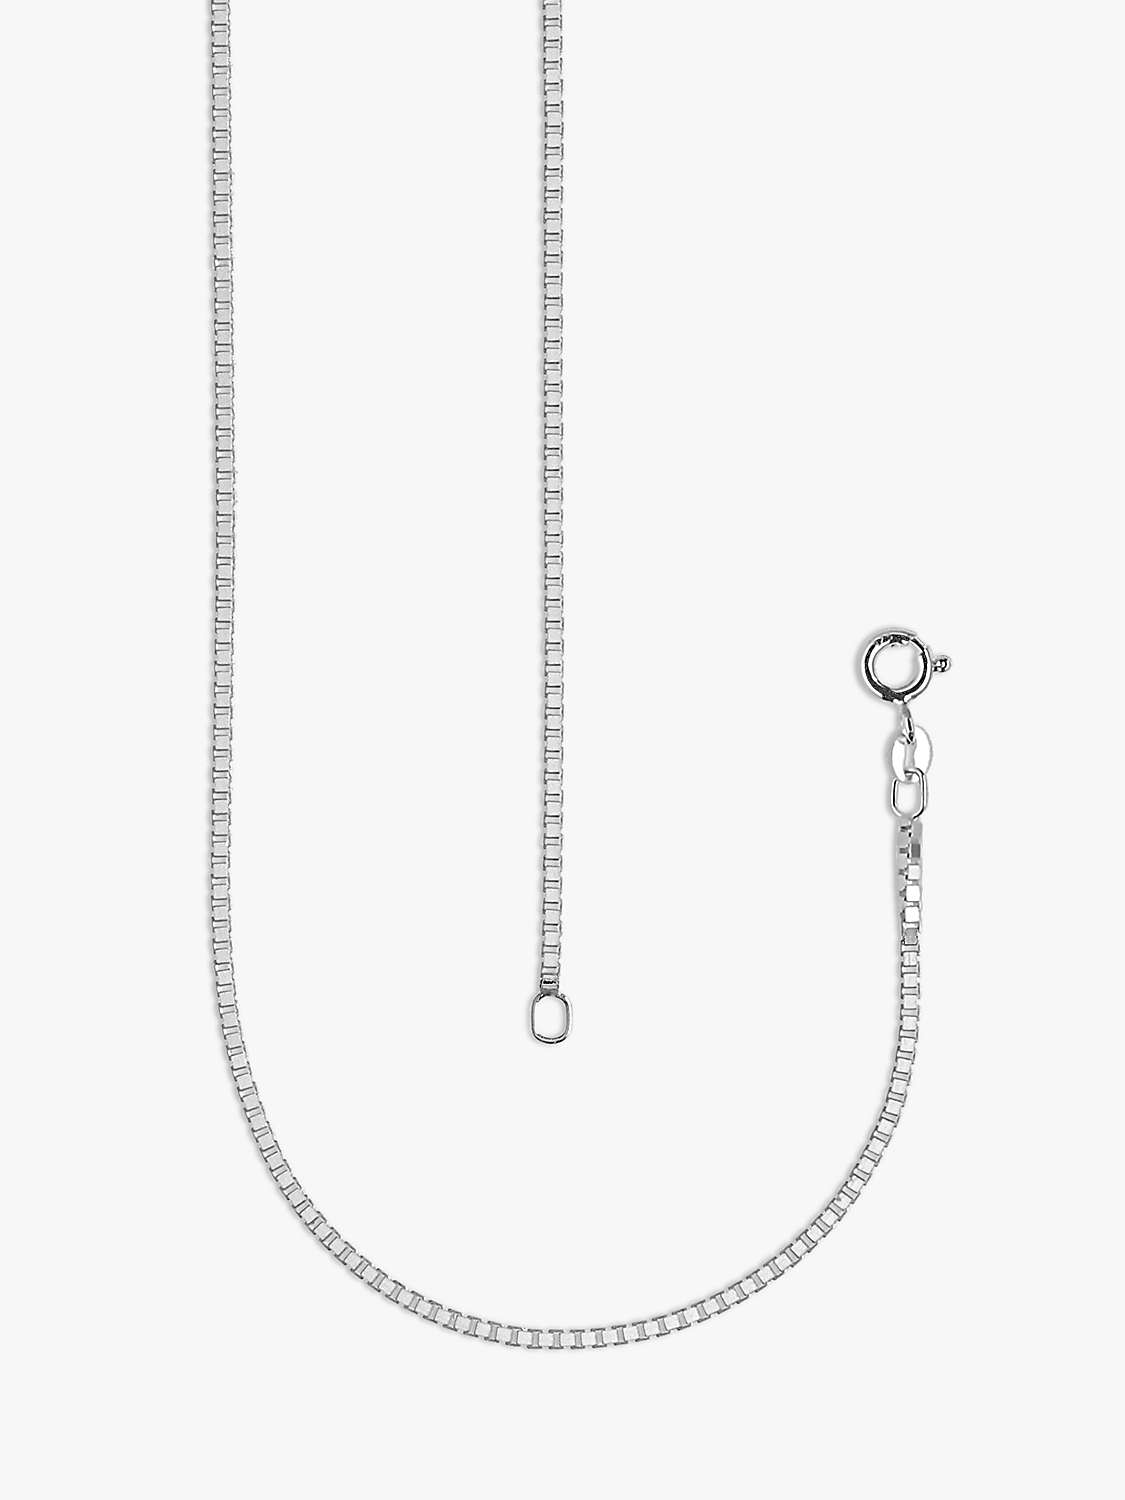 Buy Nina B Unisex Sterling Silver Box Chain Necklace, Silver Online at johnlewis.com